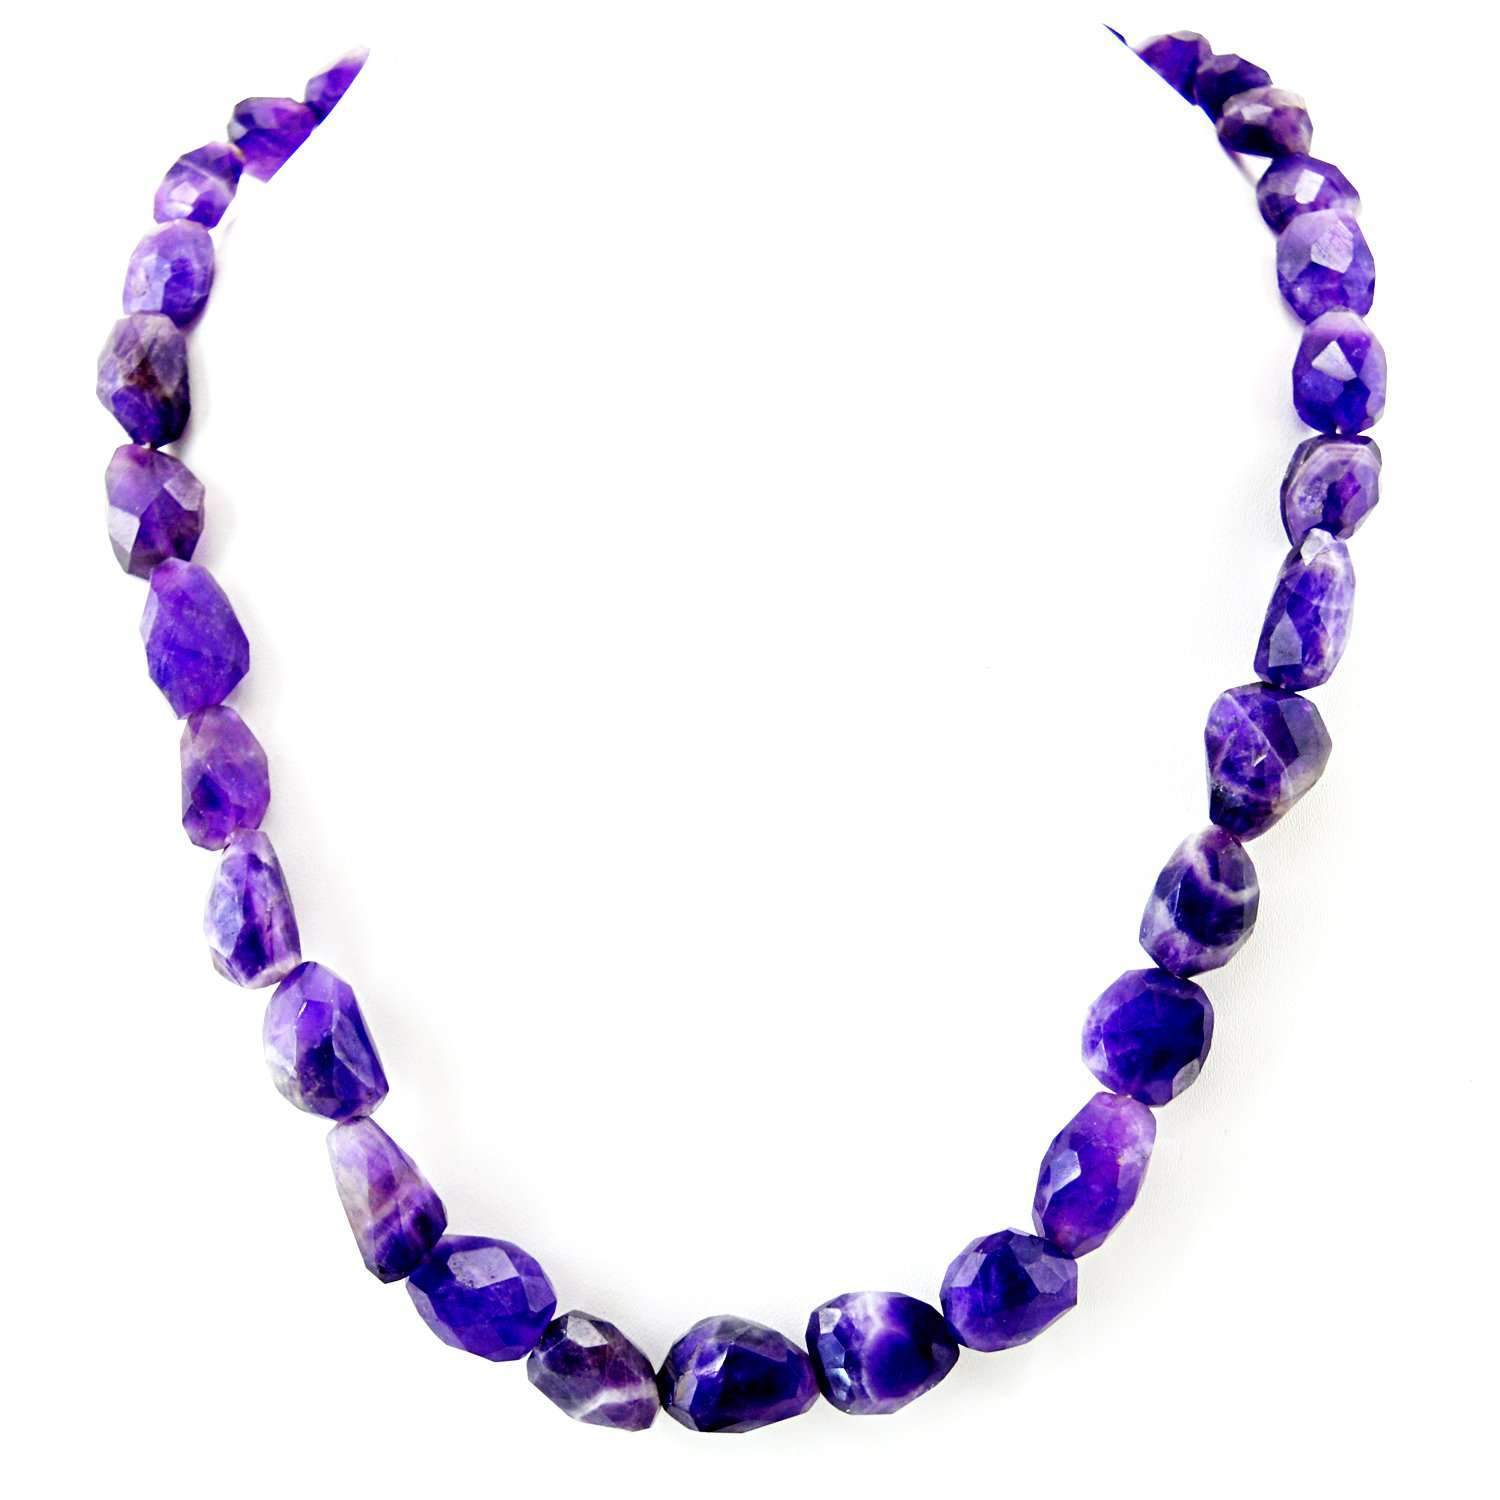 gemsmore:Bi-Color Amethyst Necklace Natural Untreated Faceted Beads